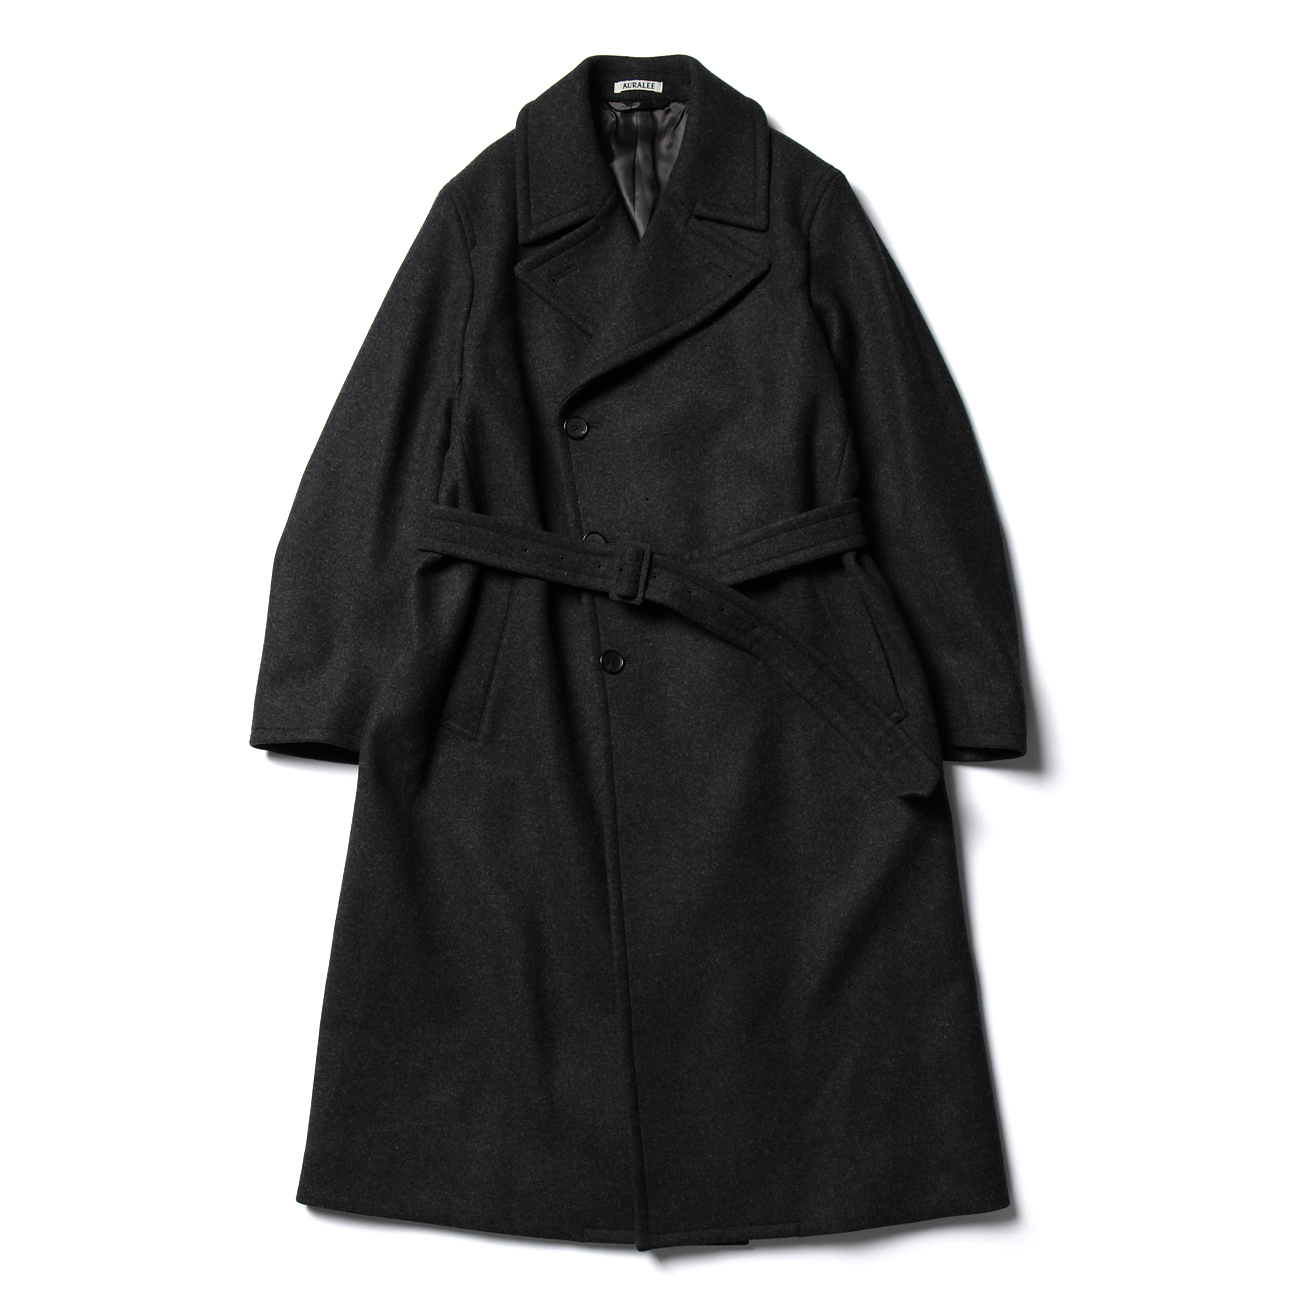 LIGHT MELTON DOUBLE-BREASTED COAT - Top Charcoal